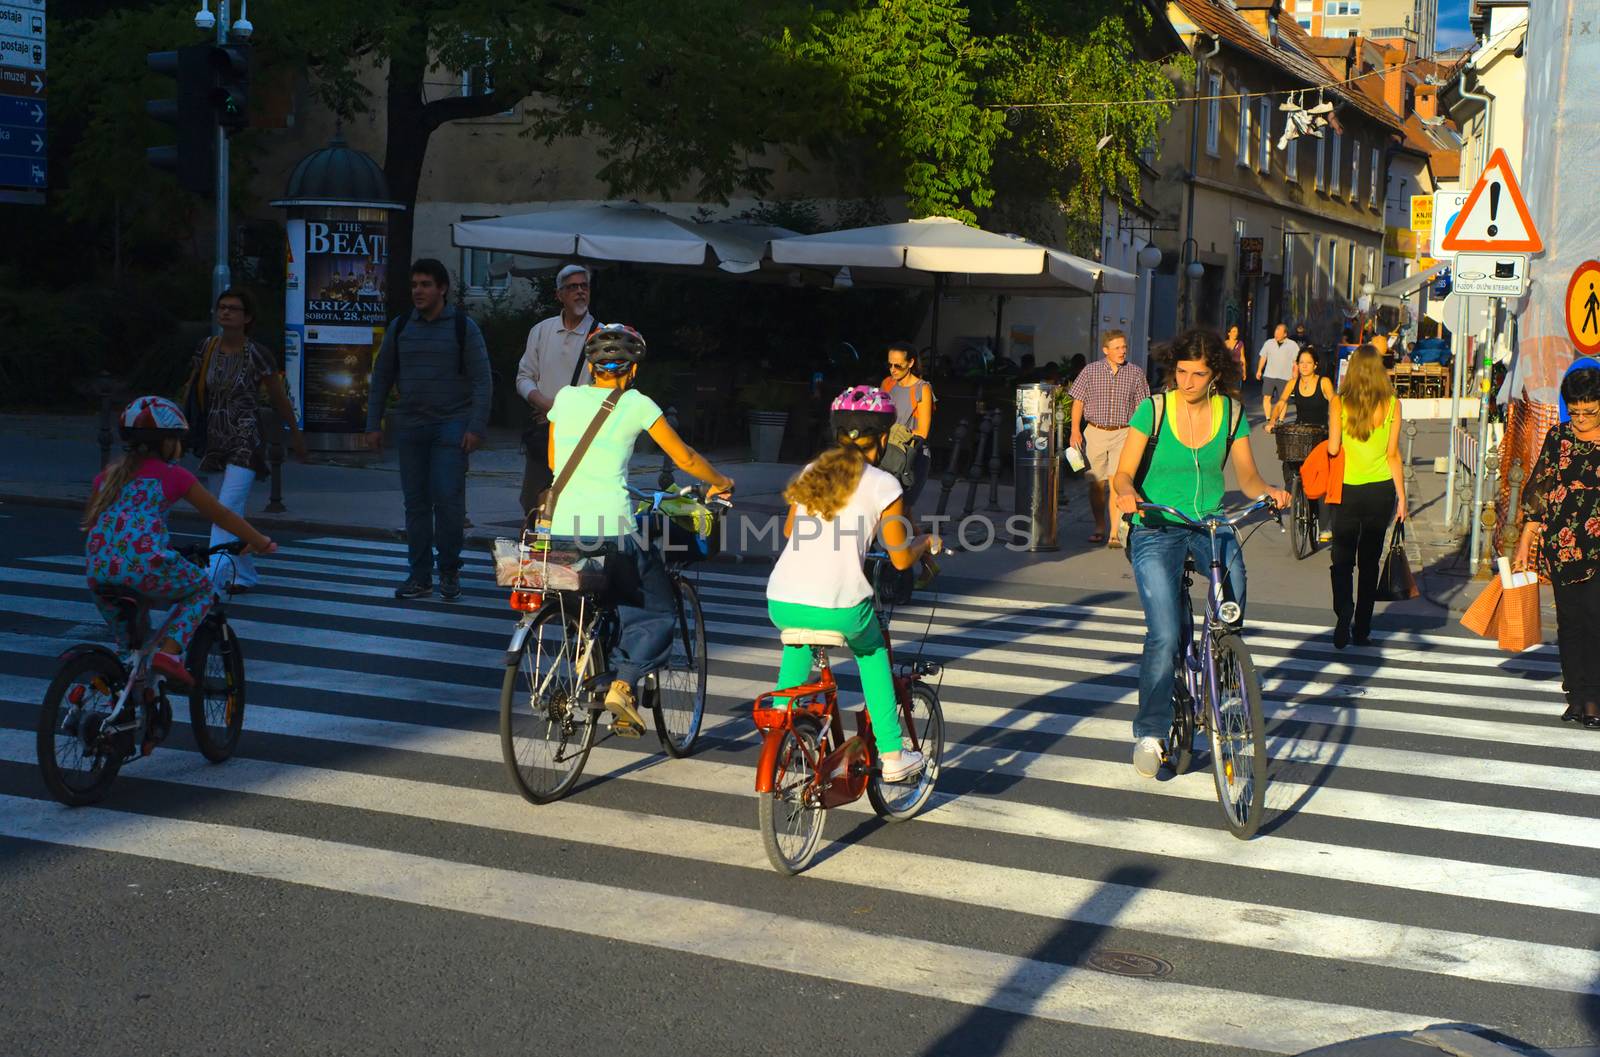 LUJBLJANA, SLOVENIA - SEPTEMBER 9, 2013: Unidentified people crossing street and riding bicycles on the street of Ljubljana. The downtown quarter usually attracts lots of tourists.